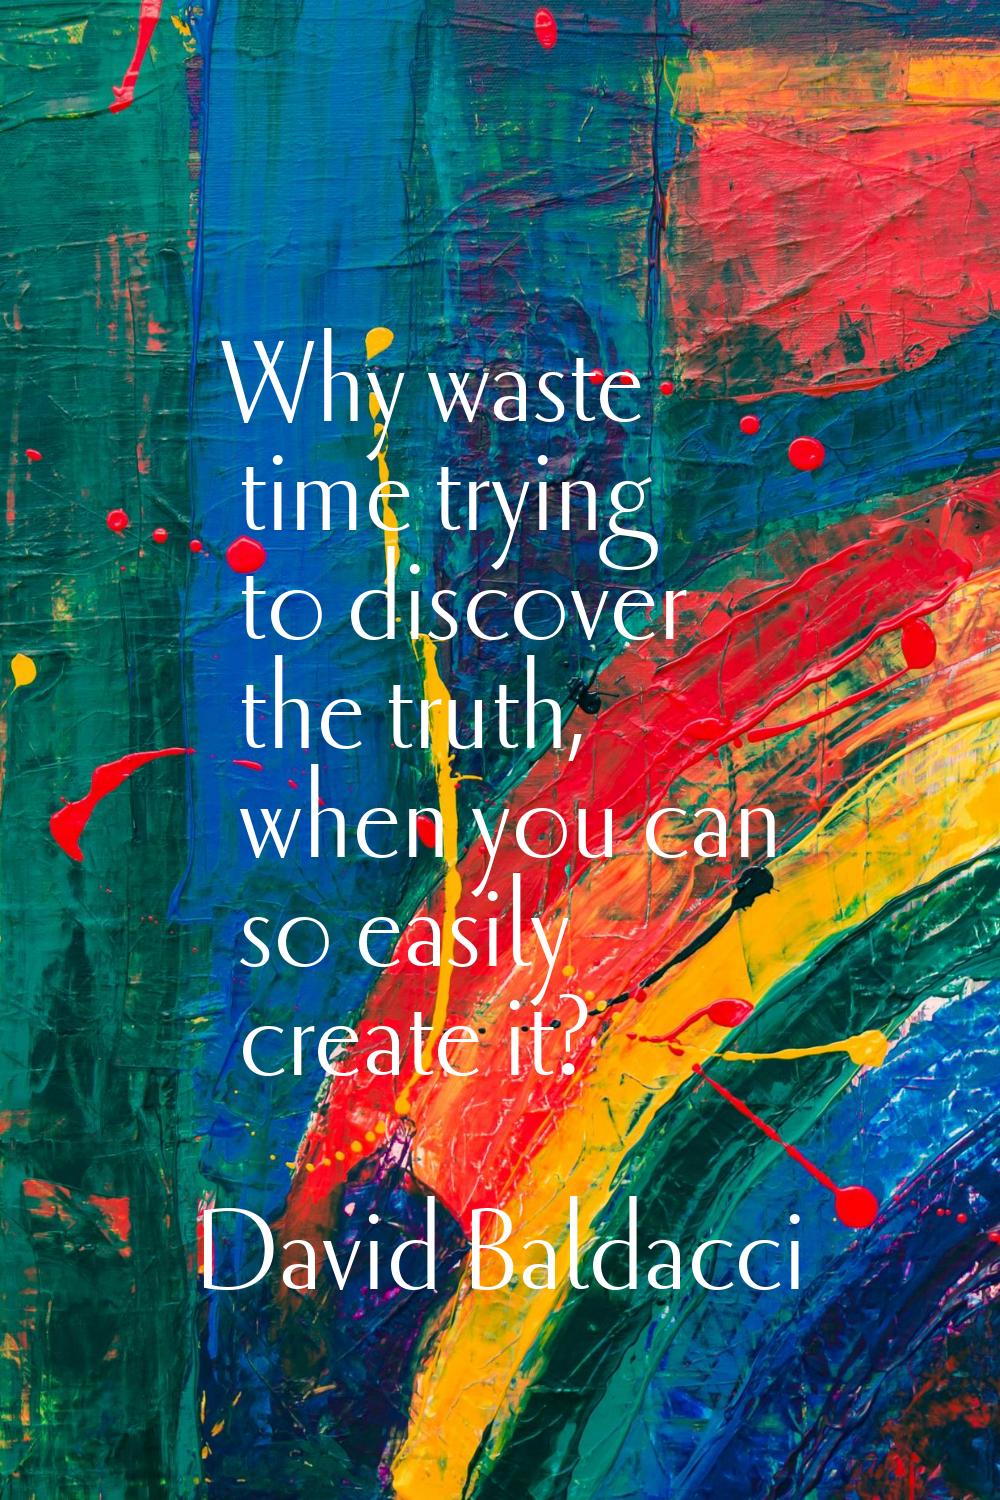 Why waste time trying to discover the truth, when you can so easily create it?